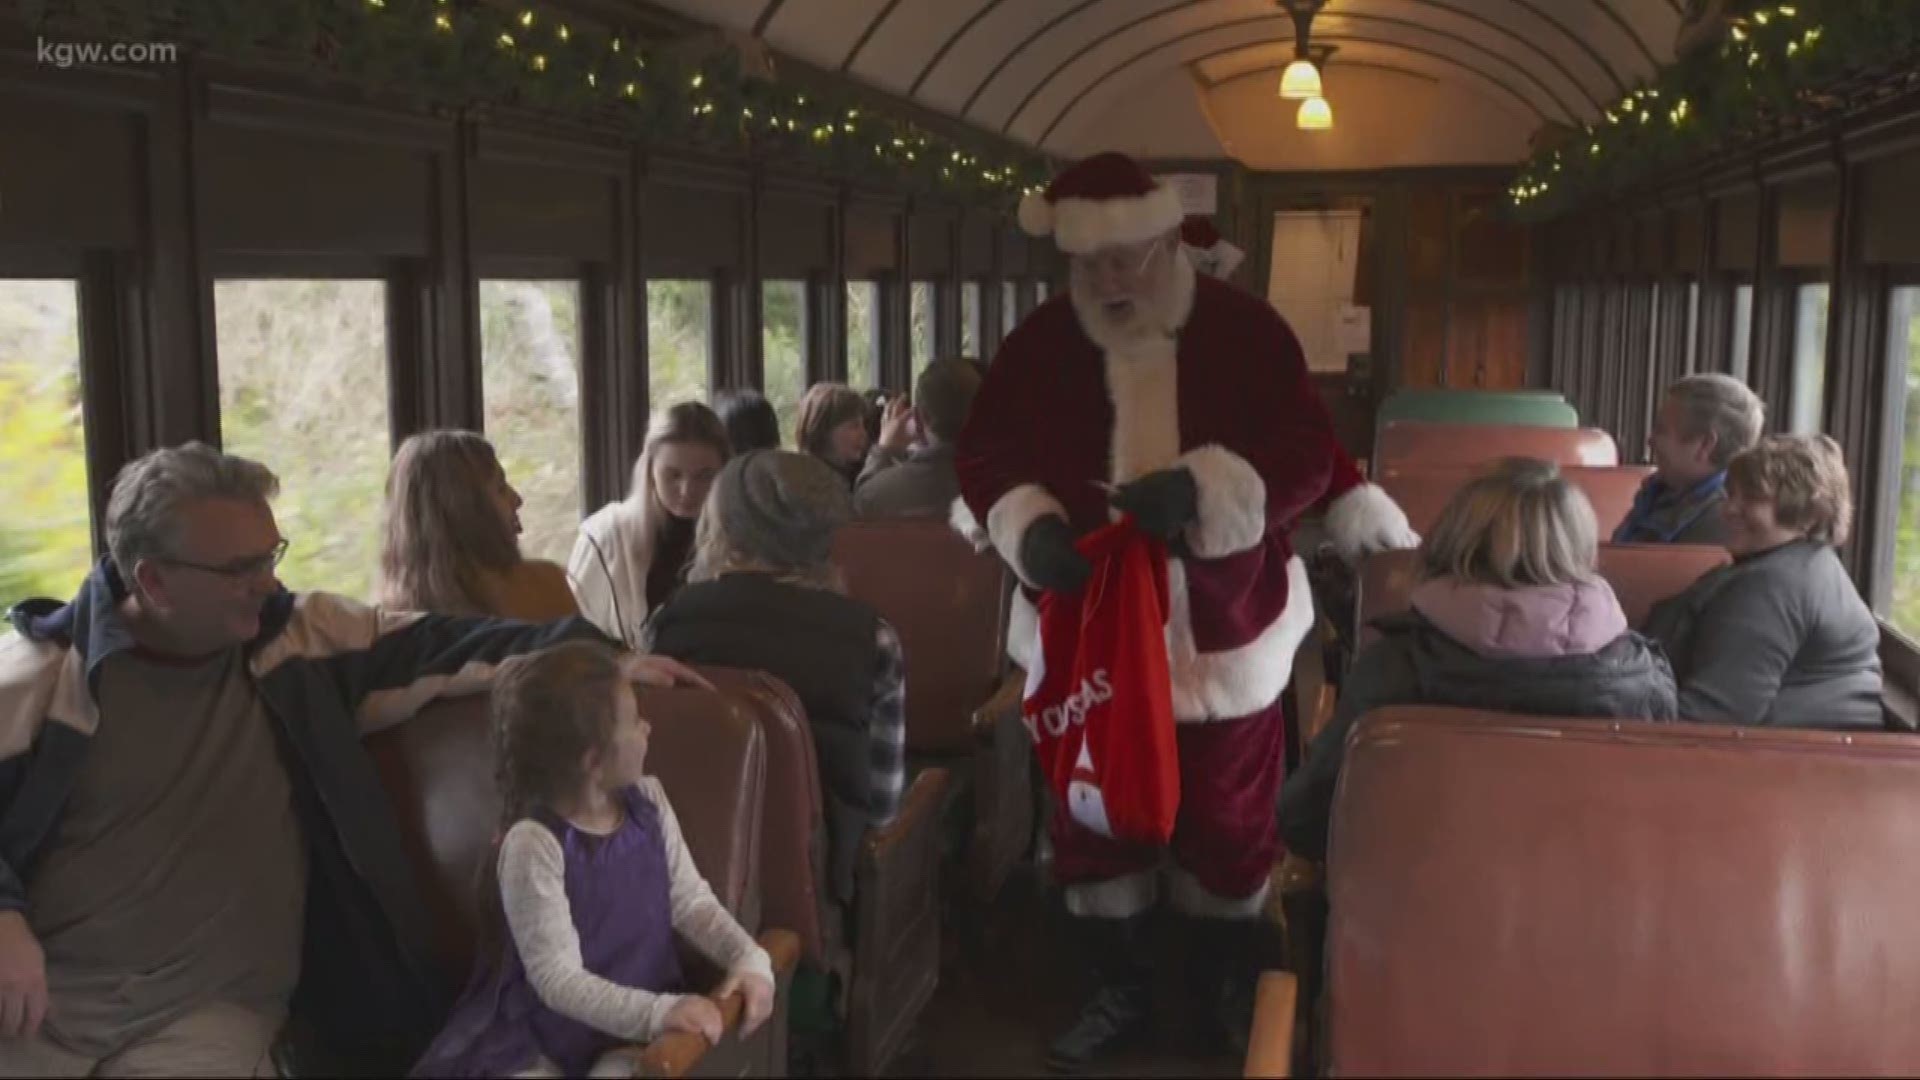 Grant McComie takes us for a ride on the Candy Cane Express at Garibaldi on the Oregon Coast.